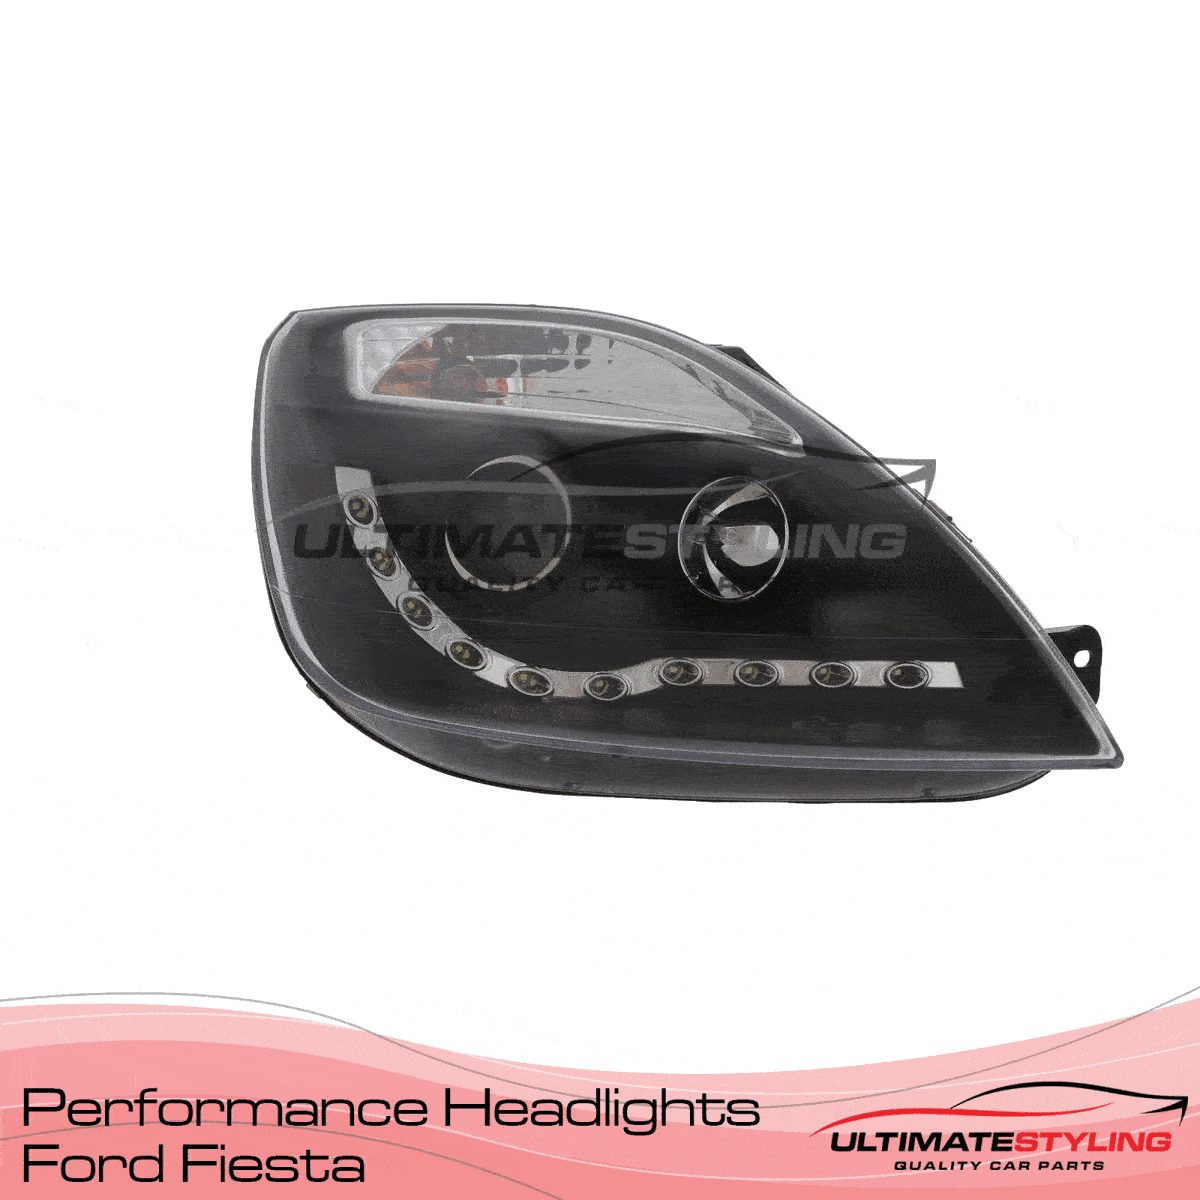 360 view of a Ford Fiesta aftermarket headlight upgrade